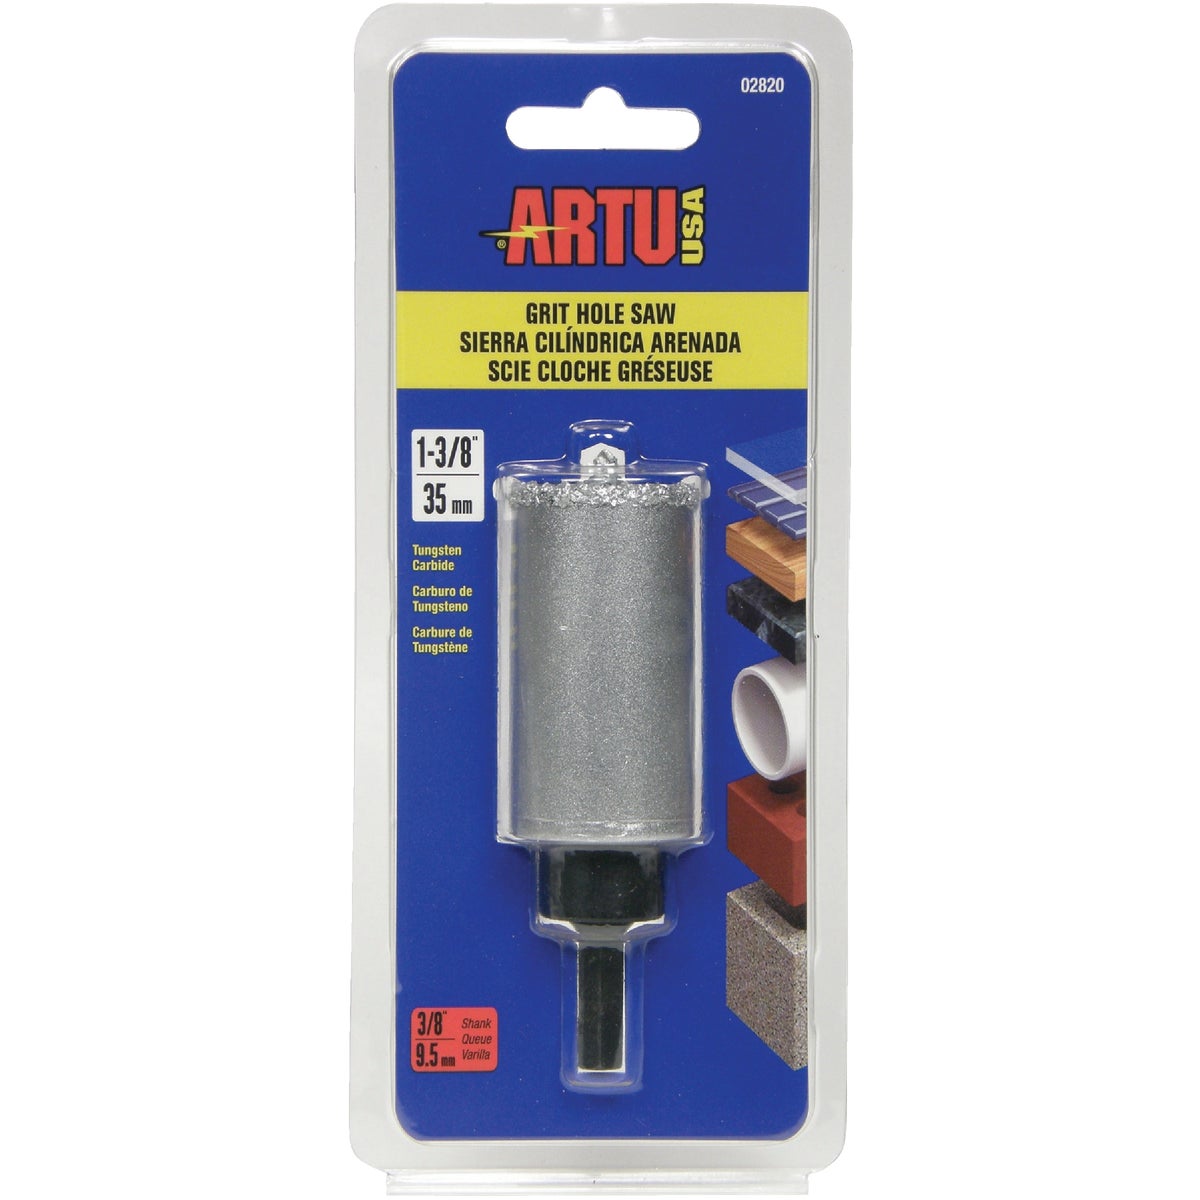 ARTU 1-3/8 In. Tungsten Carbide Grit Hole Saw with Arbor and Pilot Bit